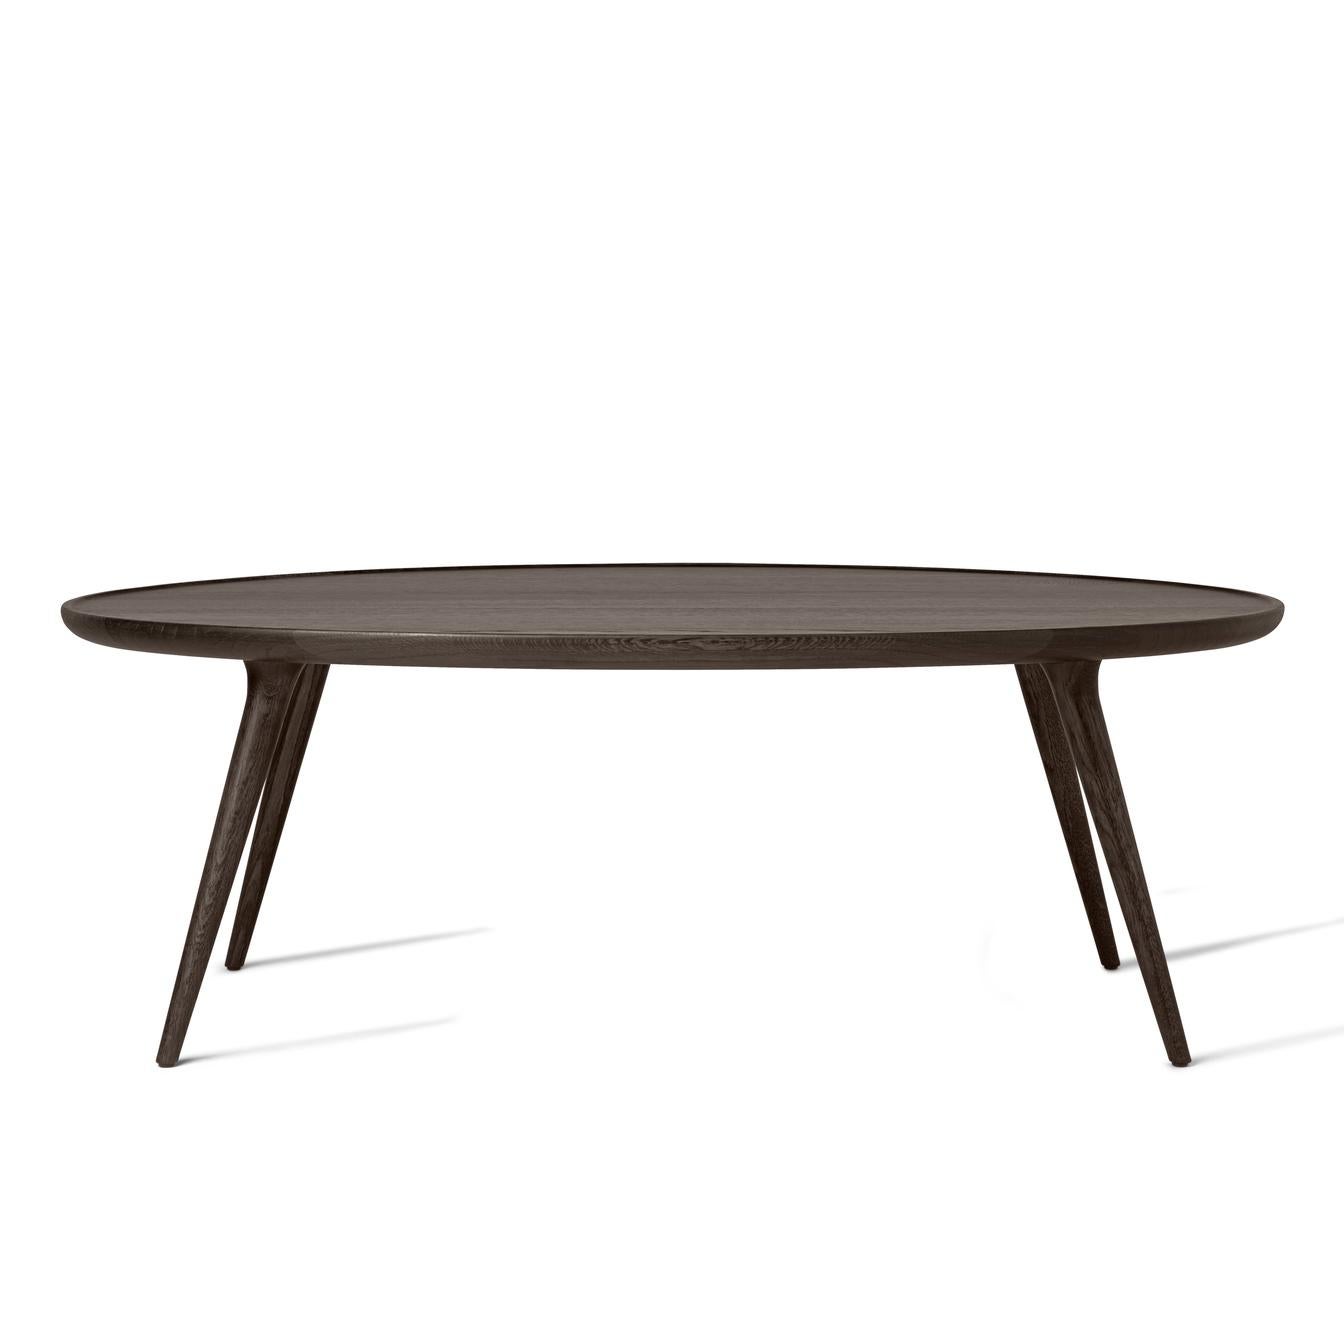 European Accent Round Table L FSC Certified Oak Sirka Grey Stain by Mater Design